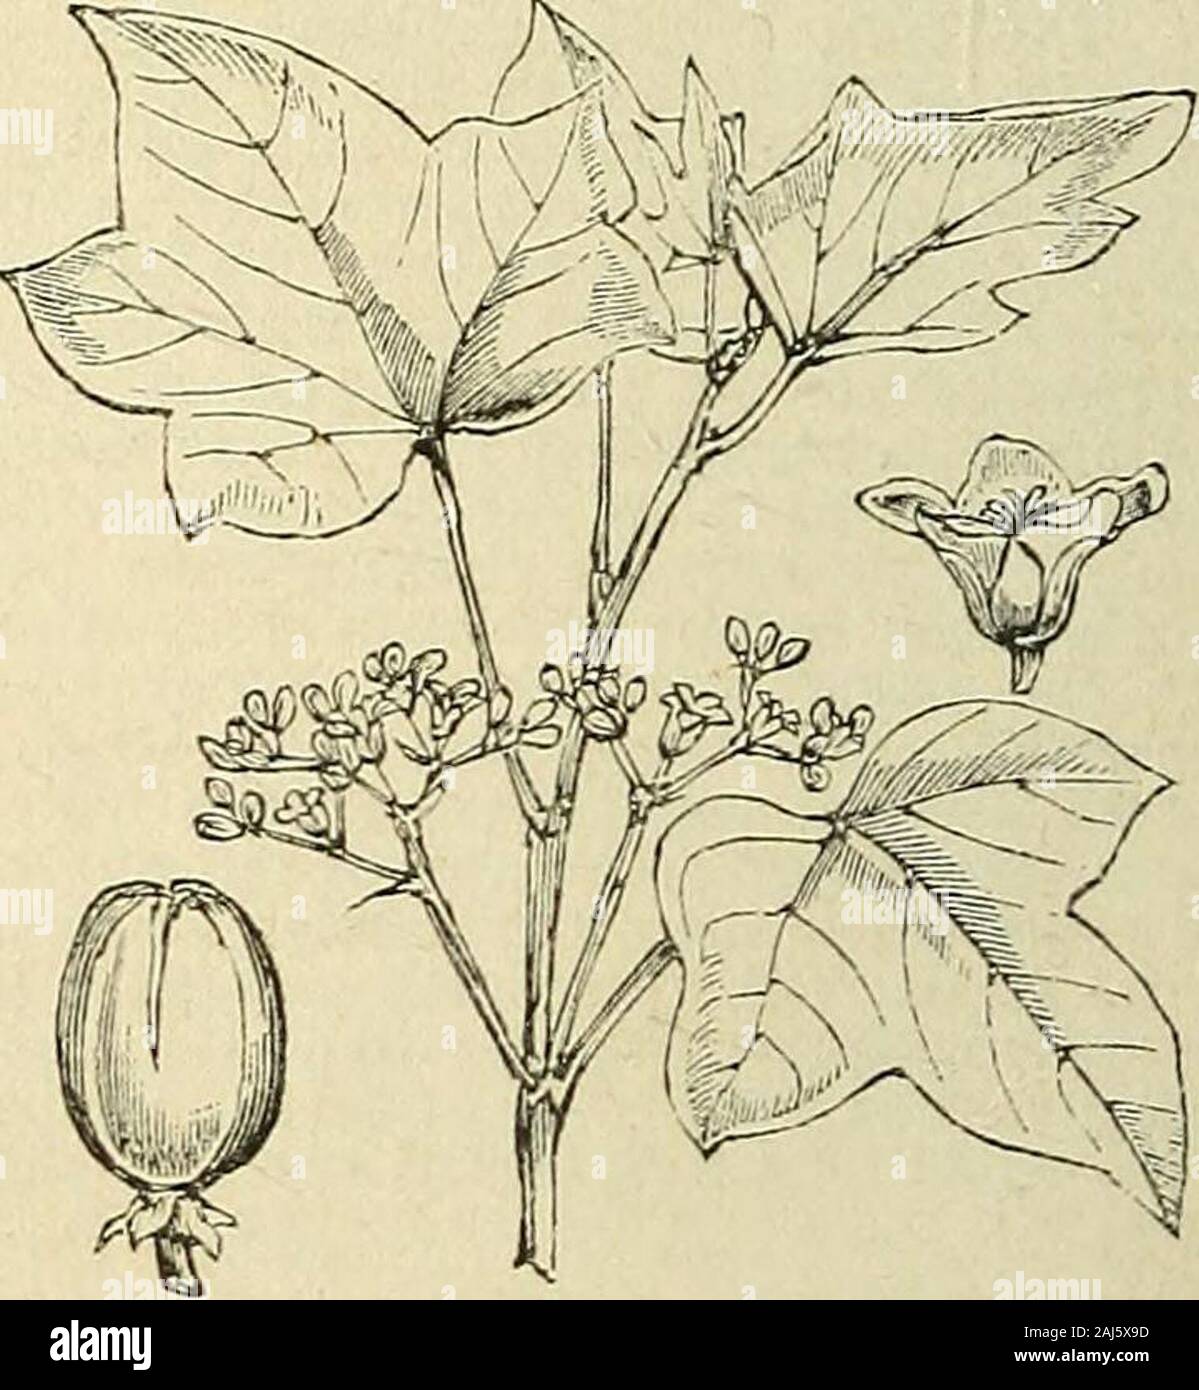 The treasury of botany: a popular dictionary of the vegetable kingdom; with which is incorporated a glossary of botanical terms . ive leaves ; a bell-shaped corolla with afive-lobed border; and a double stamen-tube of ten stamens, the five inner longerthan the others. The females have a simi-lar calyx and corolla, and a three-lobedovary crowned with a tripartite style, eachbranch forked at the apex. Dr. Bennett in his Gatherings of a Natu-ralist, states that this tree contains amilky acrid glutinous juice, which whendropped on white linen produces an indeli-ble stain, at first of a light blue Stock Photo